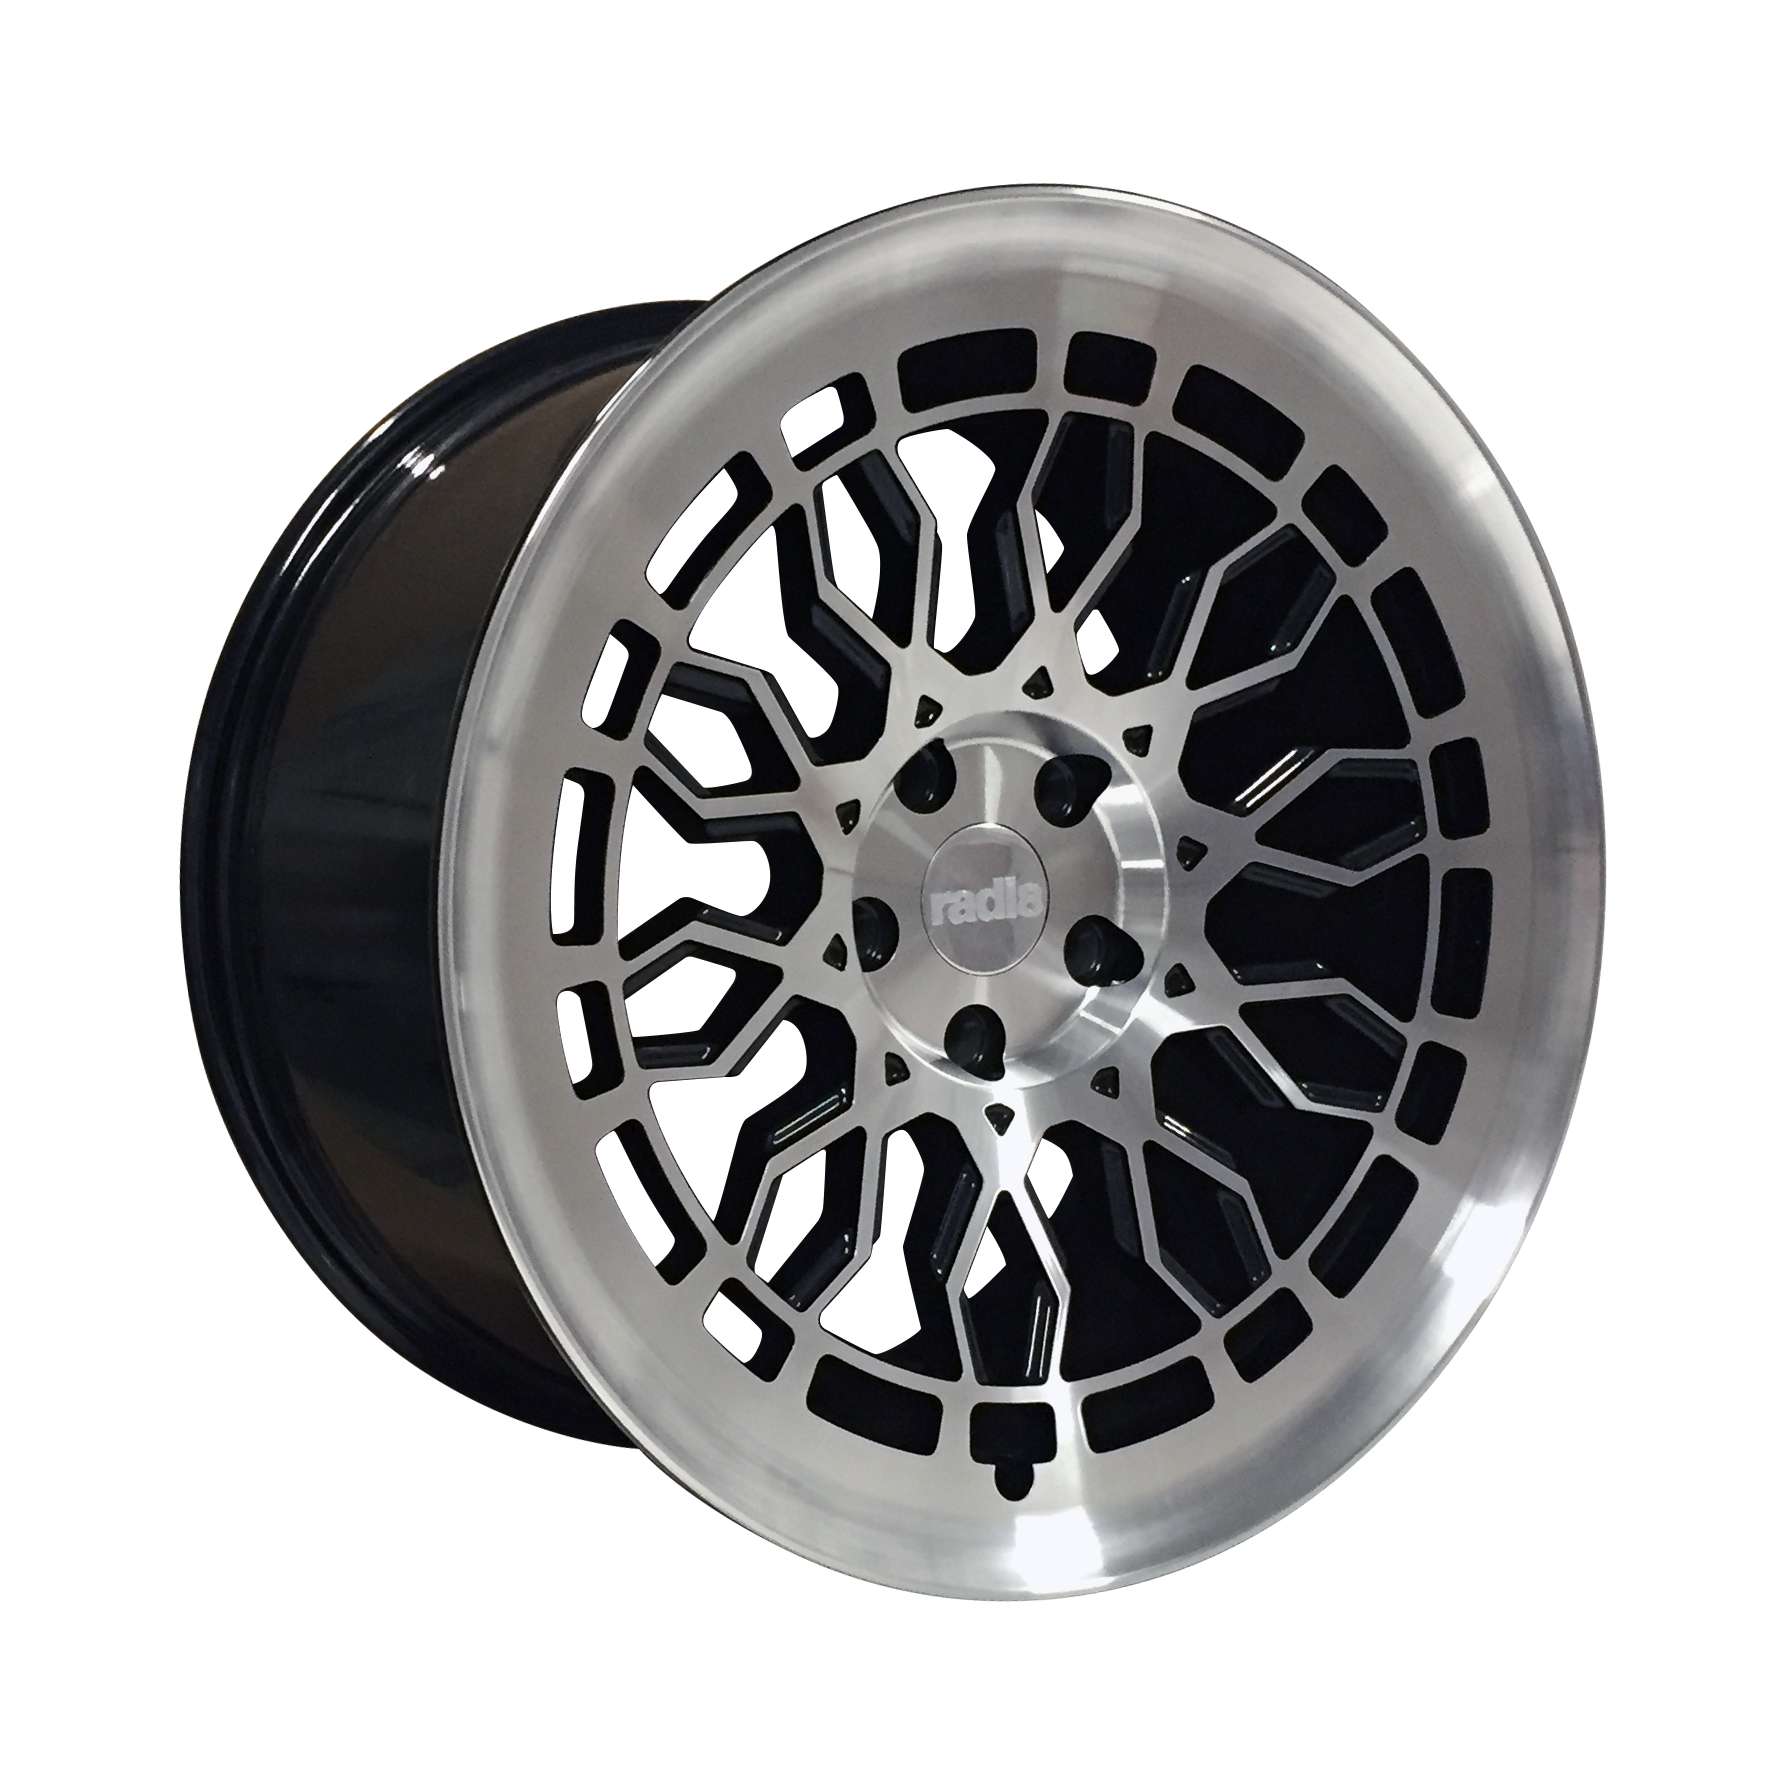 NEW 18" RADI8 R8A10 ALLOY WHEELS IN GLOSS BLACK WITH POLISHED FACE, WIDER 9.5" REARS